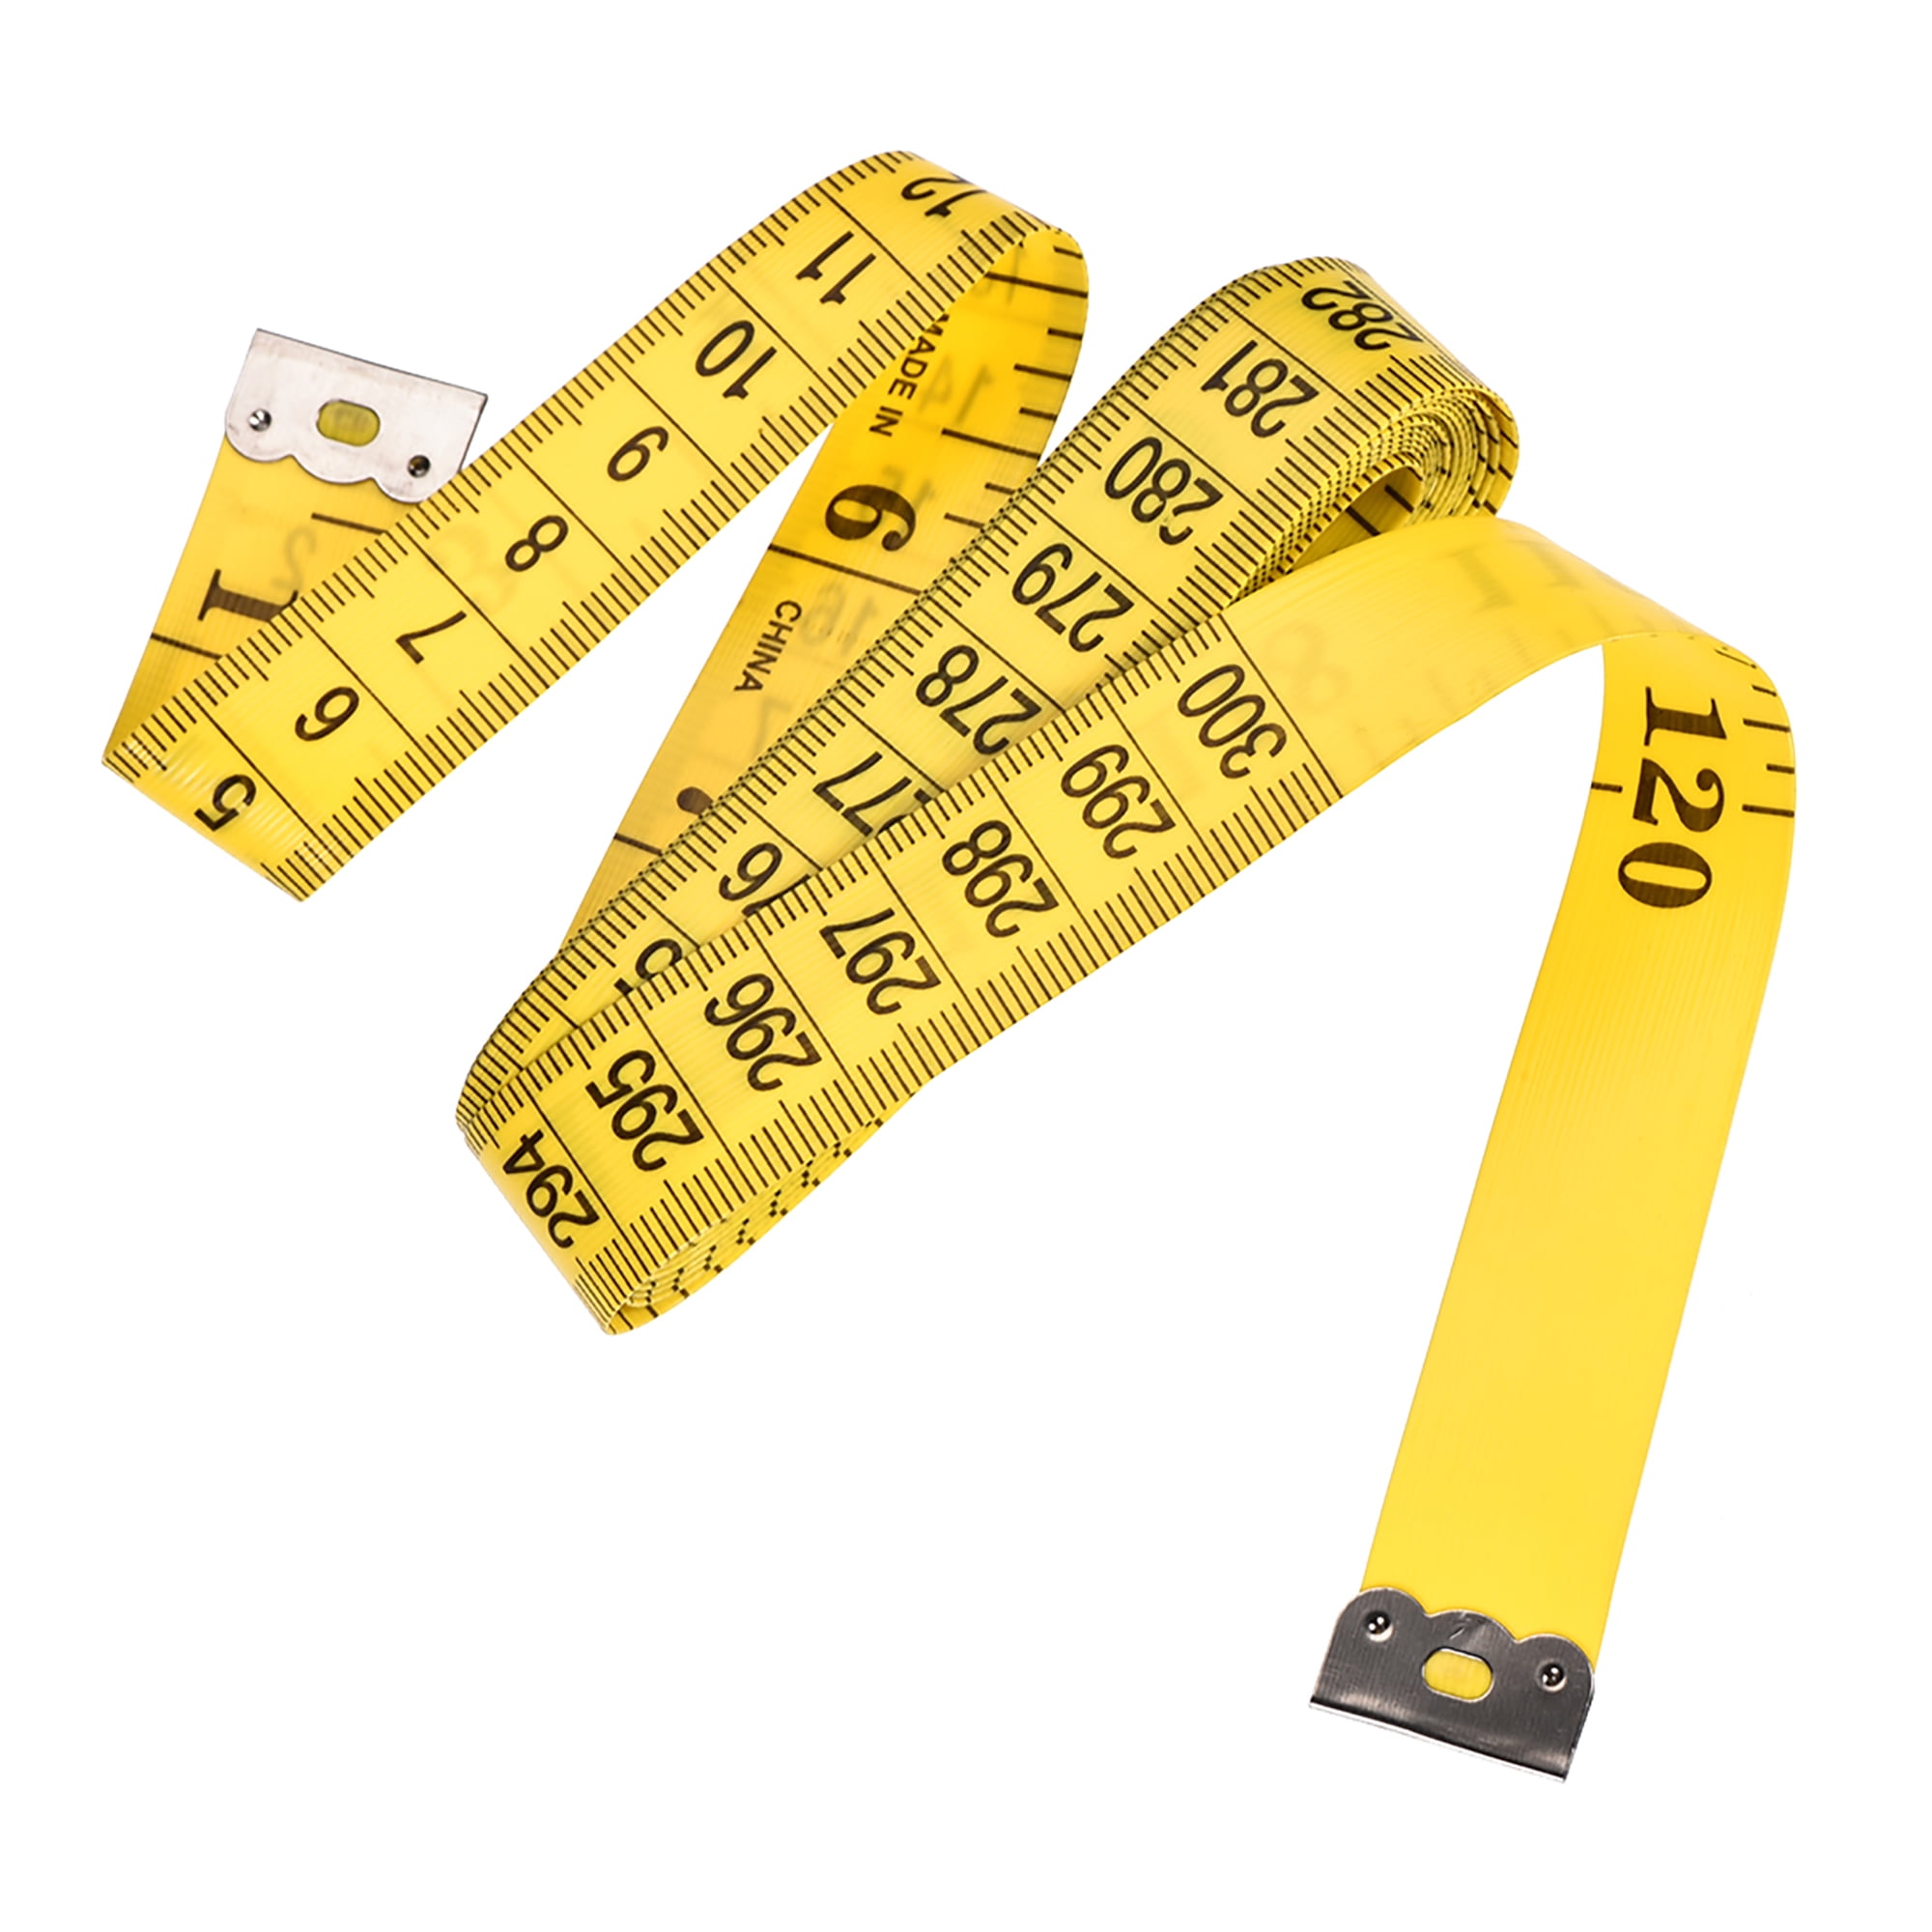 5pcs 300cm 120 inch Sewing Cloth Dieting Tailor Craft Ruler Measure Tape